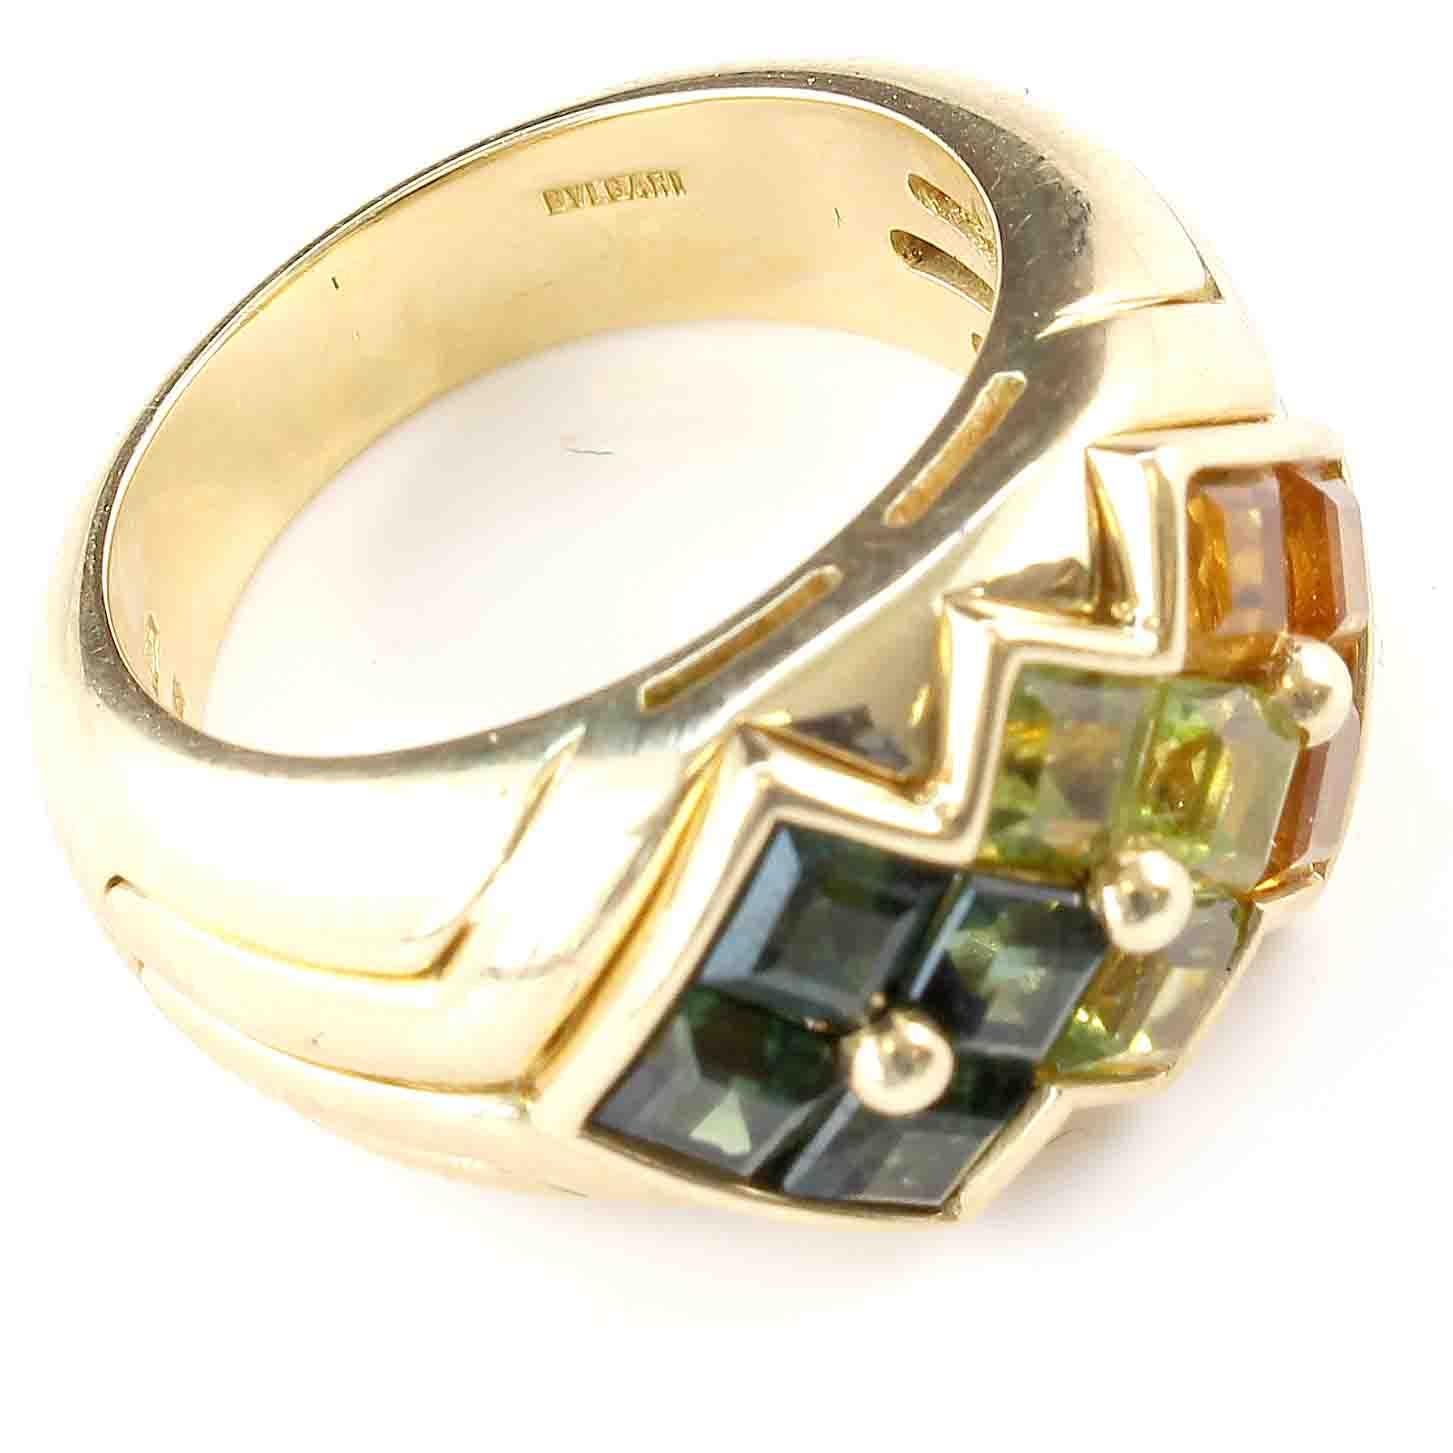  The leaders of innovative jewelry designs they have an innate sense of what gemstones to pair and they always do it with Italian flare.    Featuring well chosen and eye pleasing tourmaline and citrine gemstones. 
Ring size 6 and can easily be